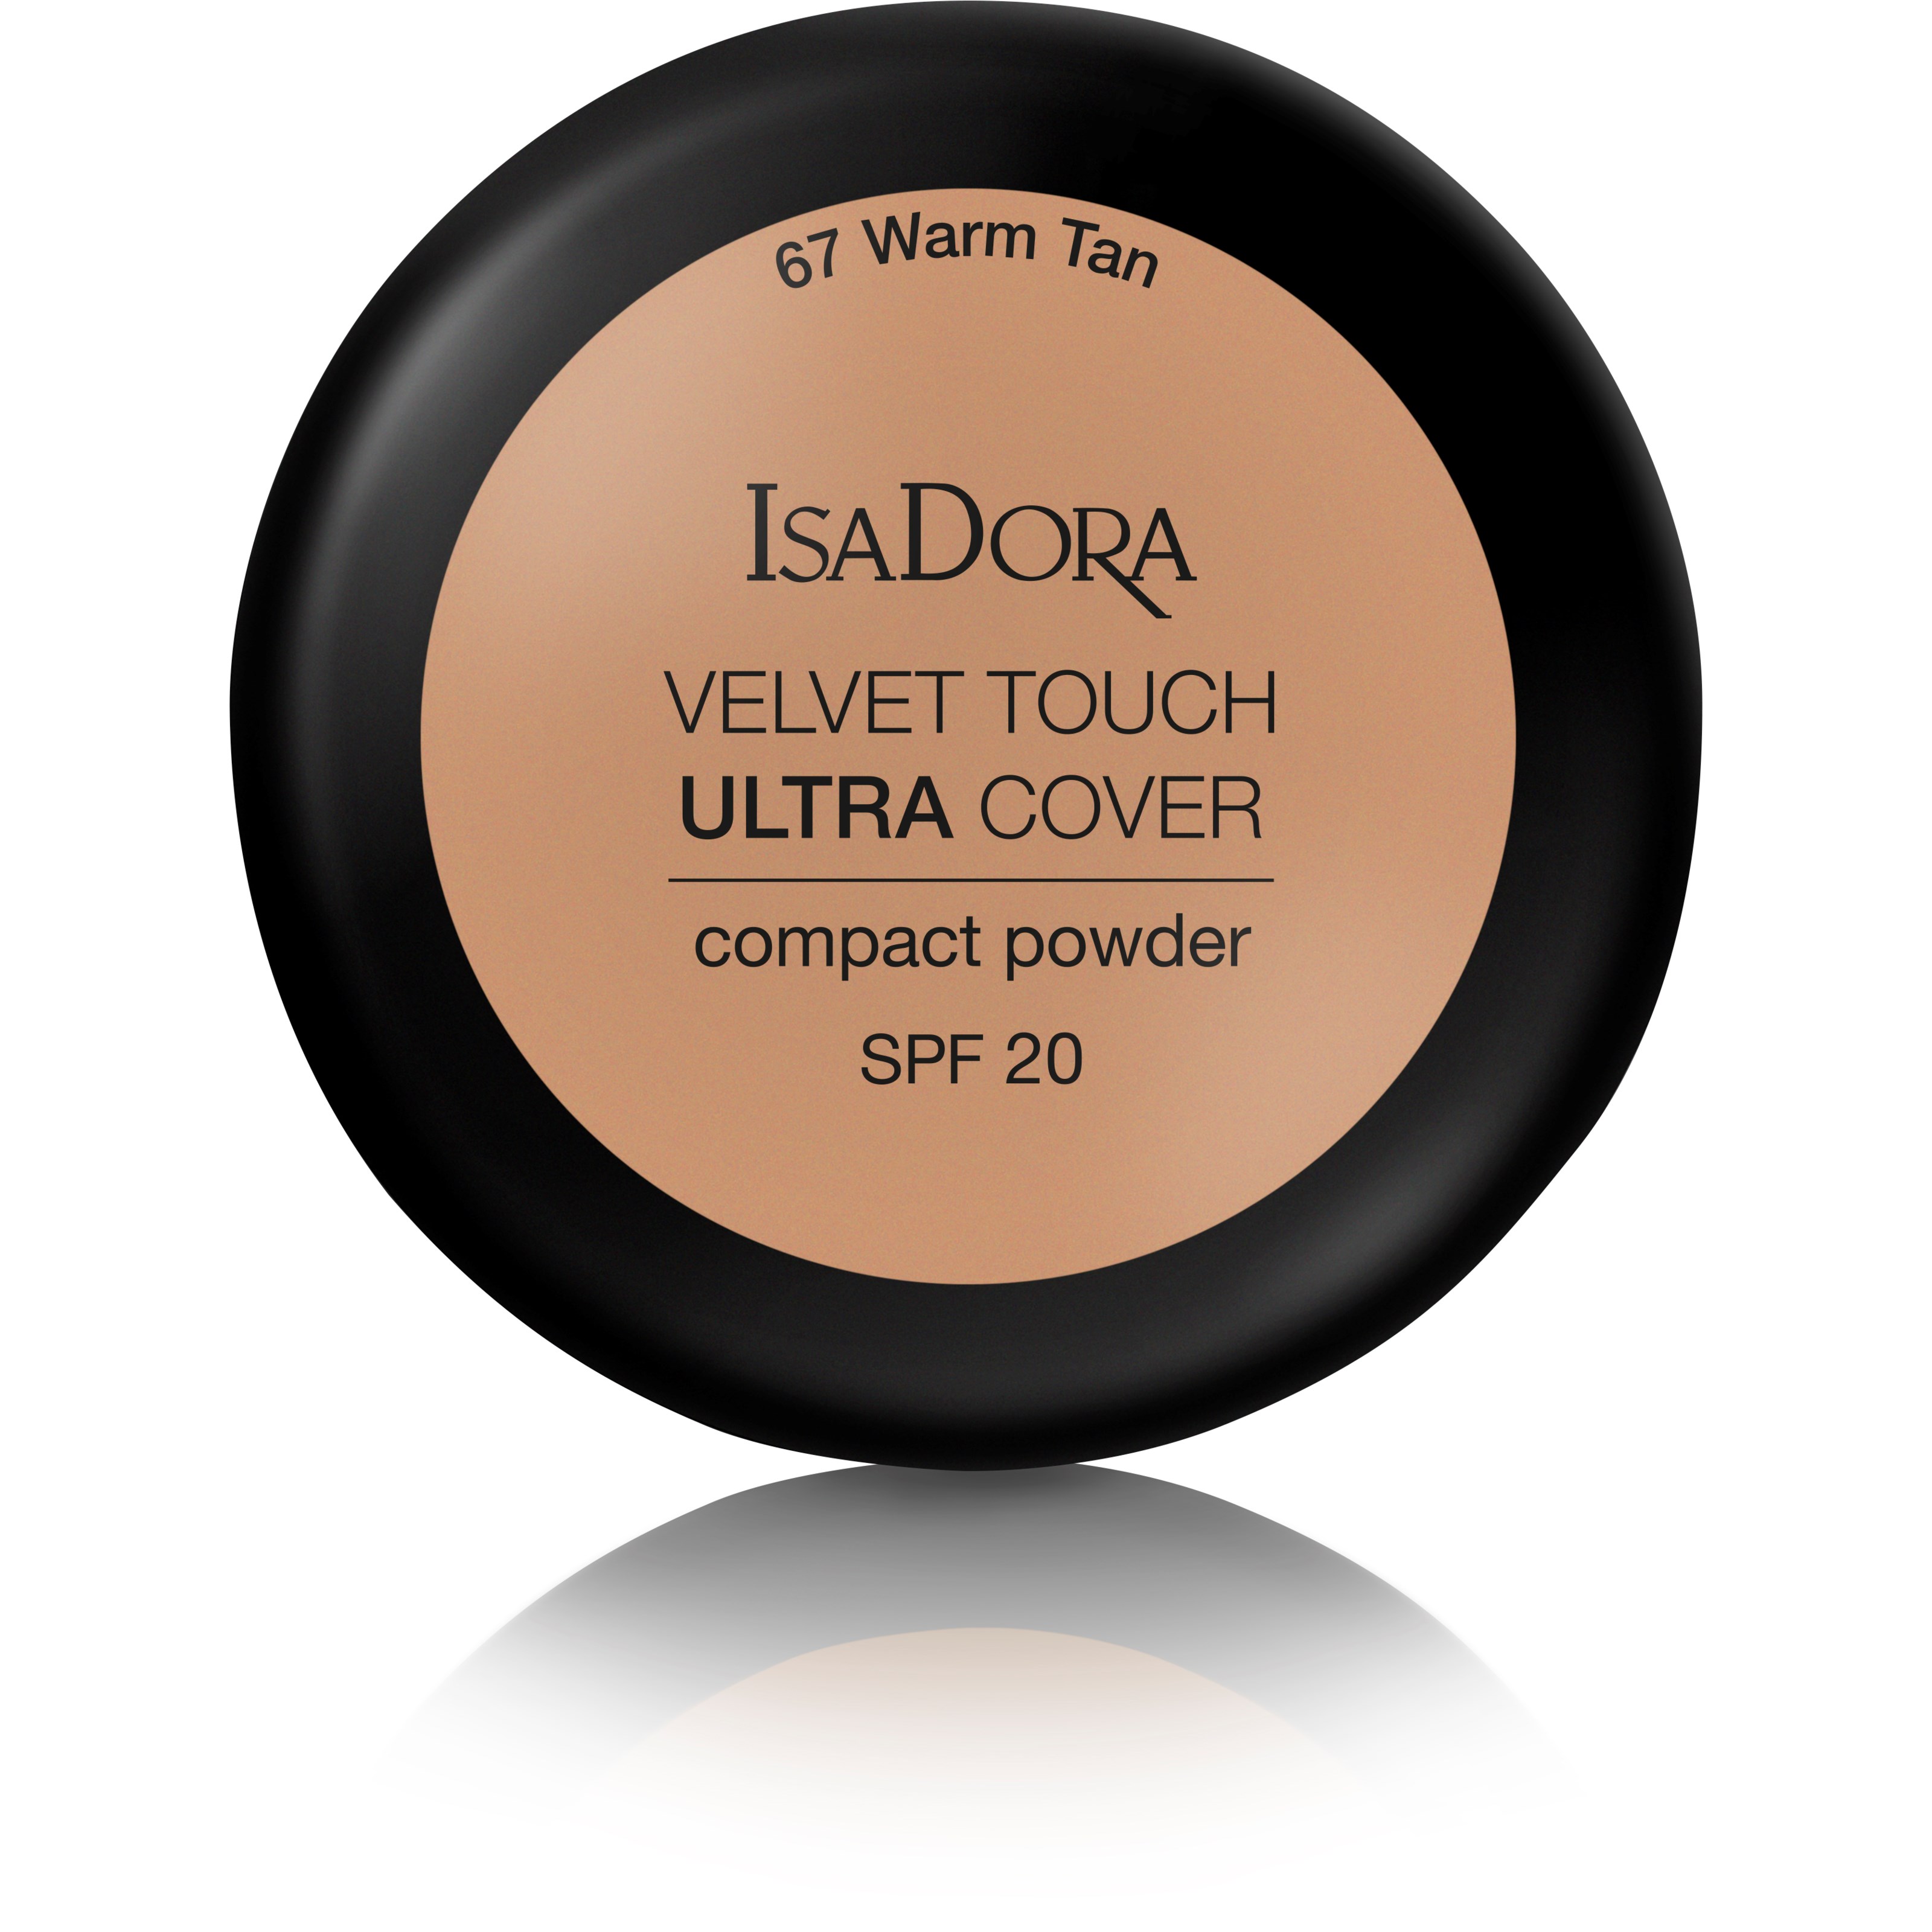 IsaDora Velvet Touch Ultra Cover Compact Power Spf 20 67 Warm Tan